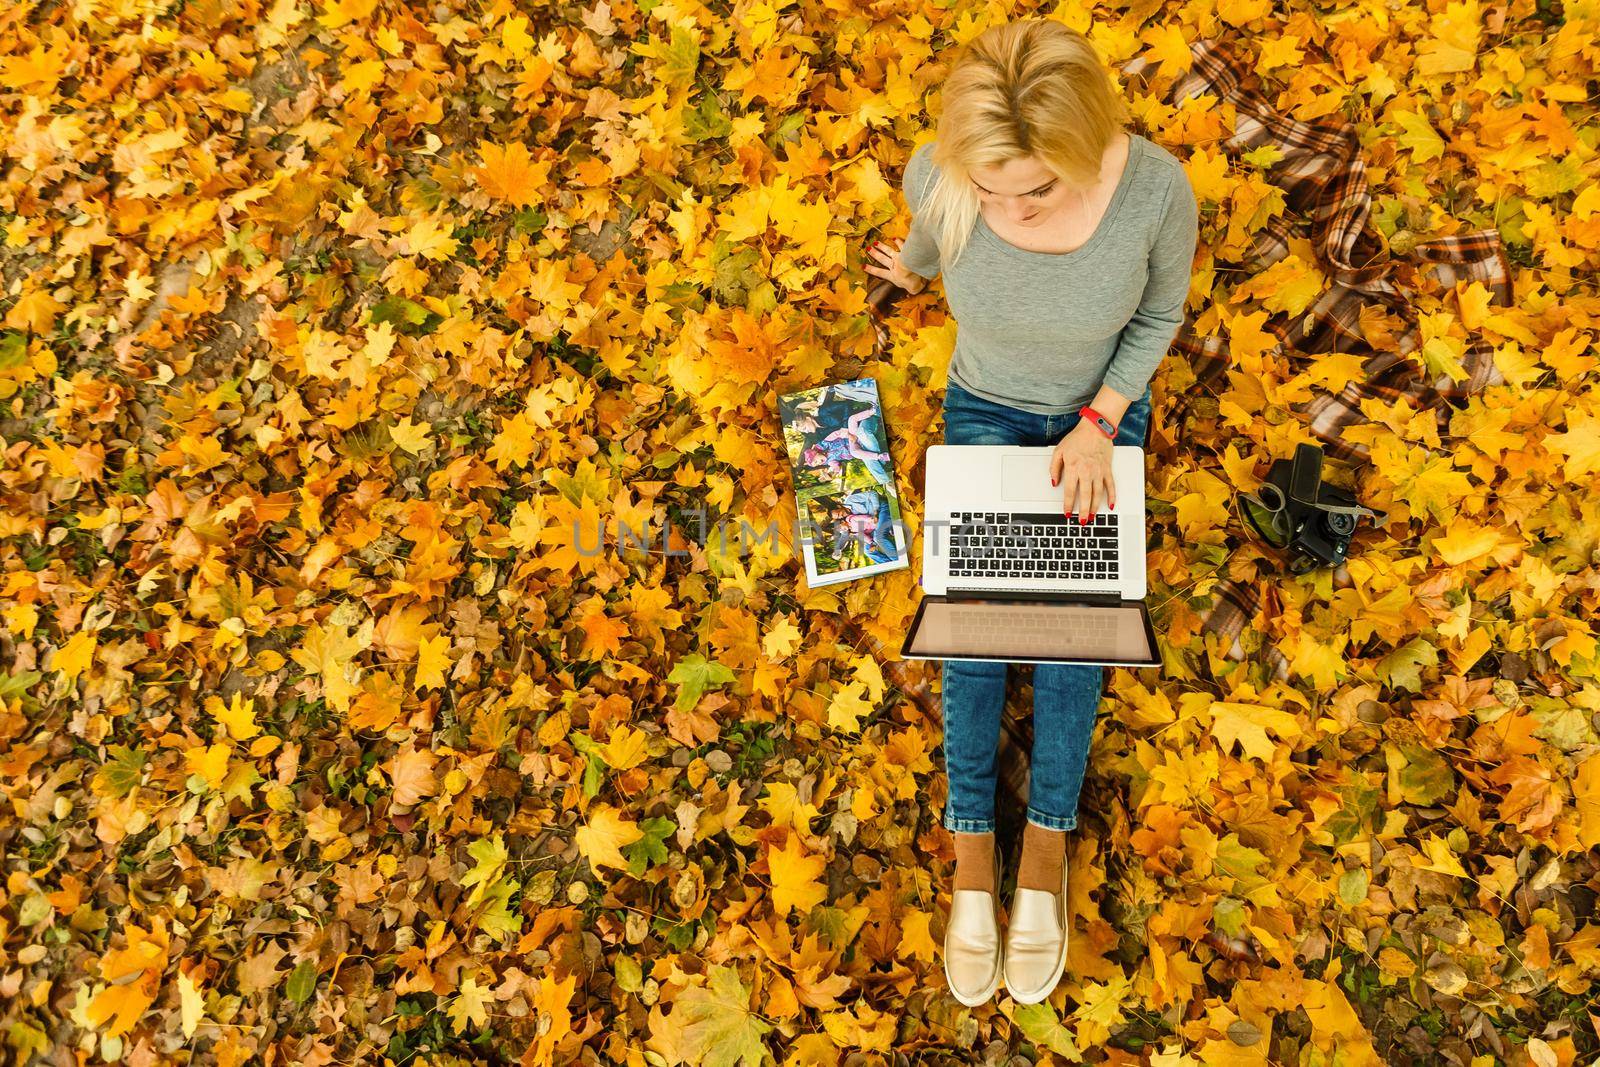 Cute woman with laptop in the autumn park. Beauty nature scene with colorful foliage background, yellow trees and leaves at fall season. Autumn outdoor lifestyle. Happy smiling woman on fall leaves by Andelov13